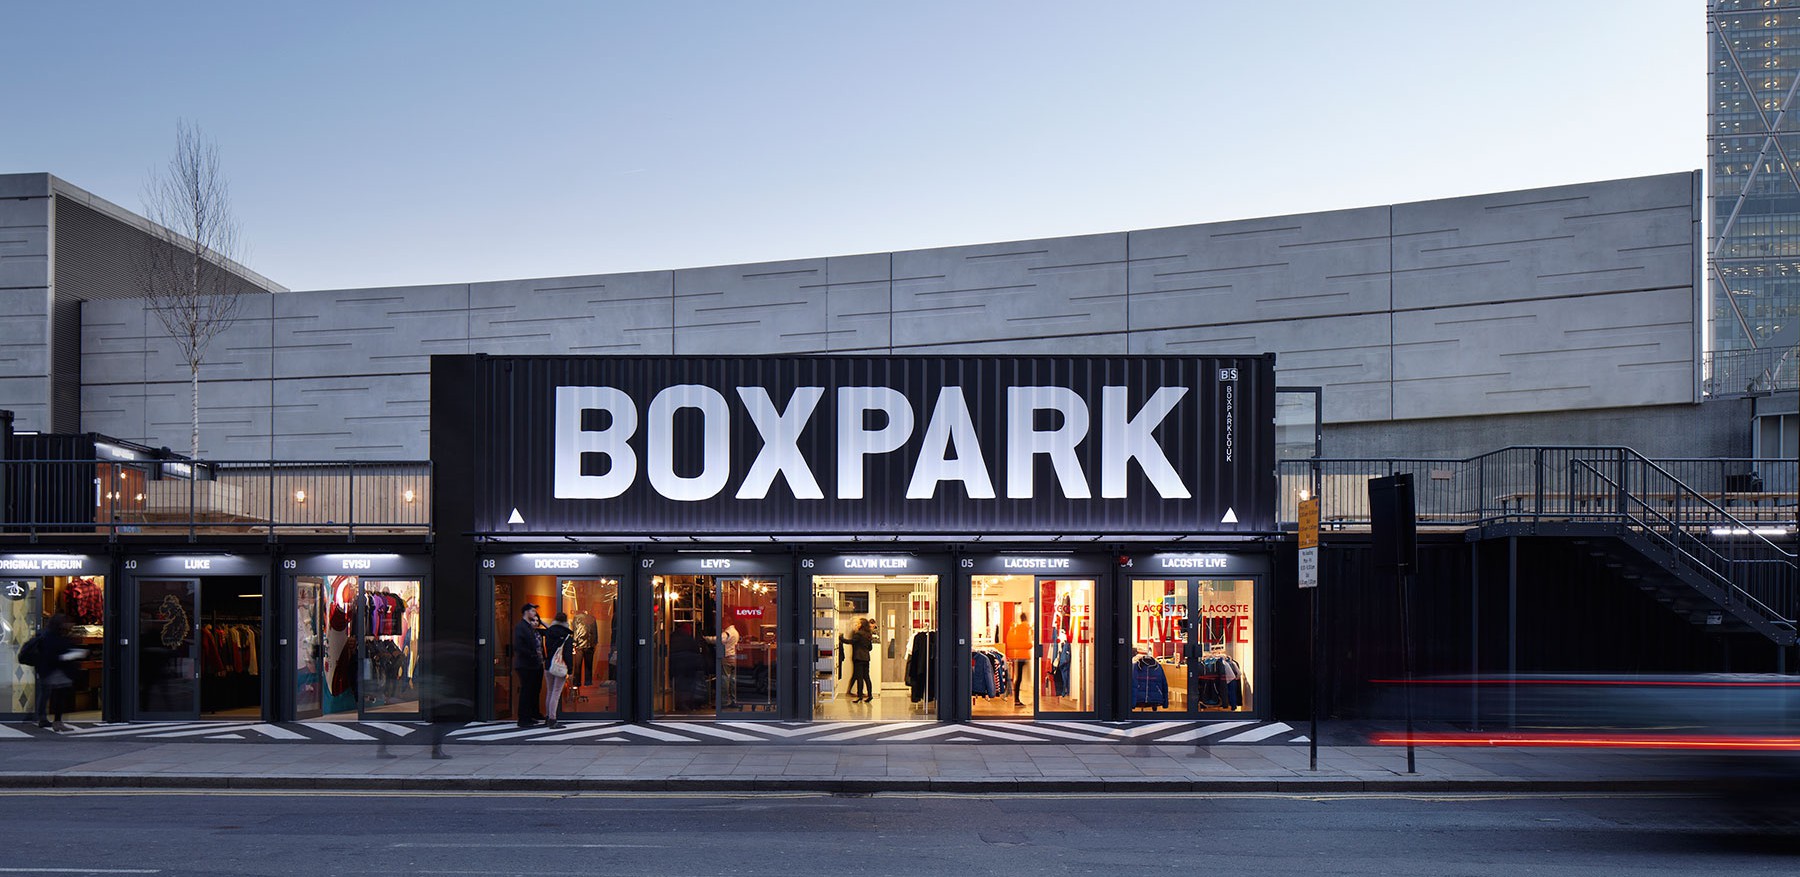 BOXPARK-Shoreditch-England-NeoPlaces